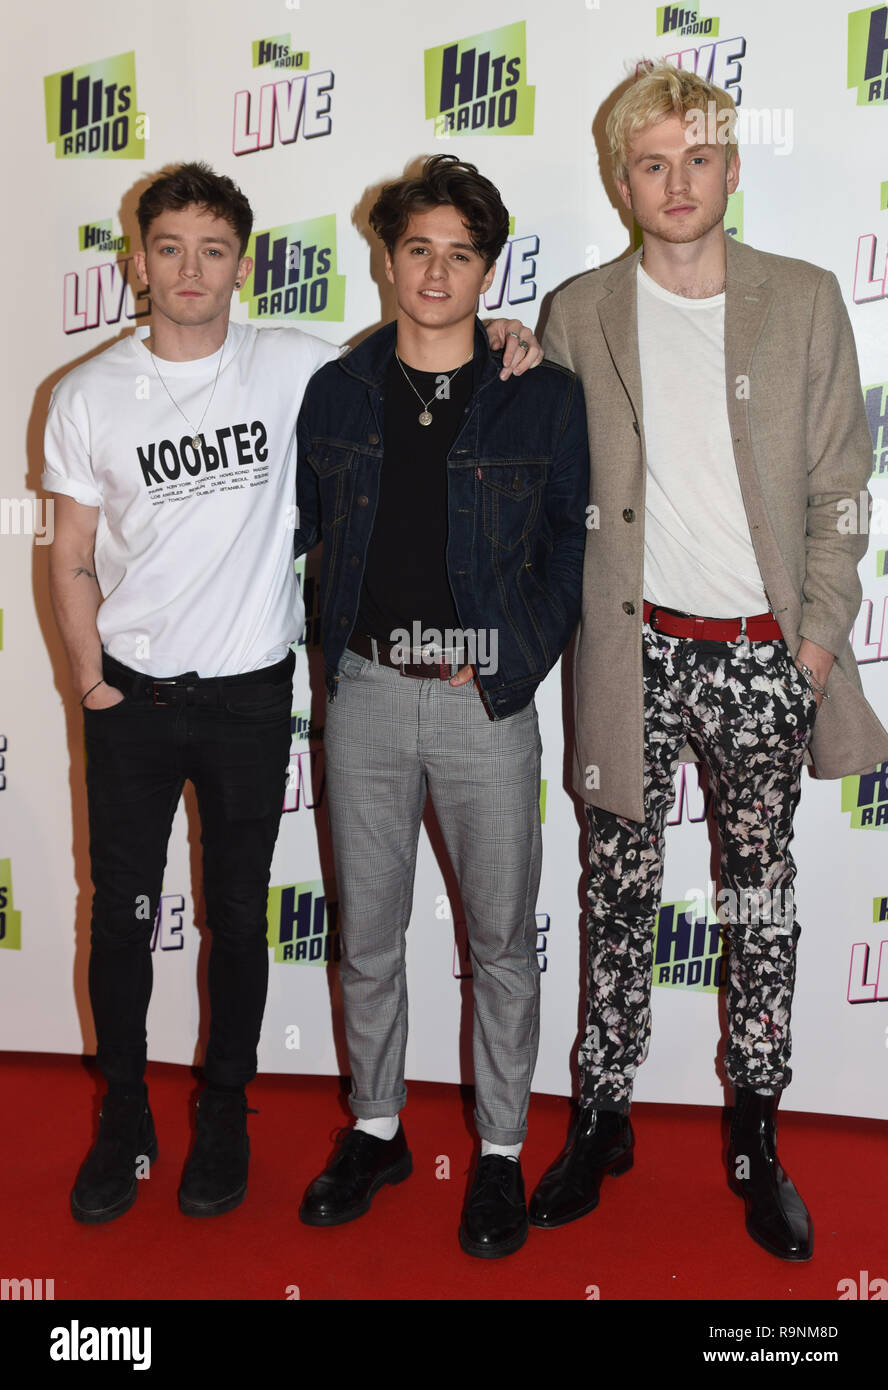 Celebrities arrive at Hits Radio Live 2018 at Manchester Arena in  Manchester Featuring: the vamps Where: Liverpool, United Kingdom When: 25  Nov 2018 Credit: Graham Finney/WENN Stock Photo - Alamy